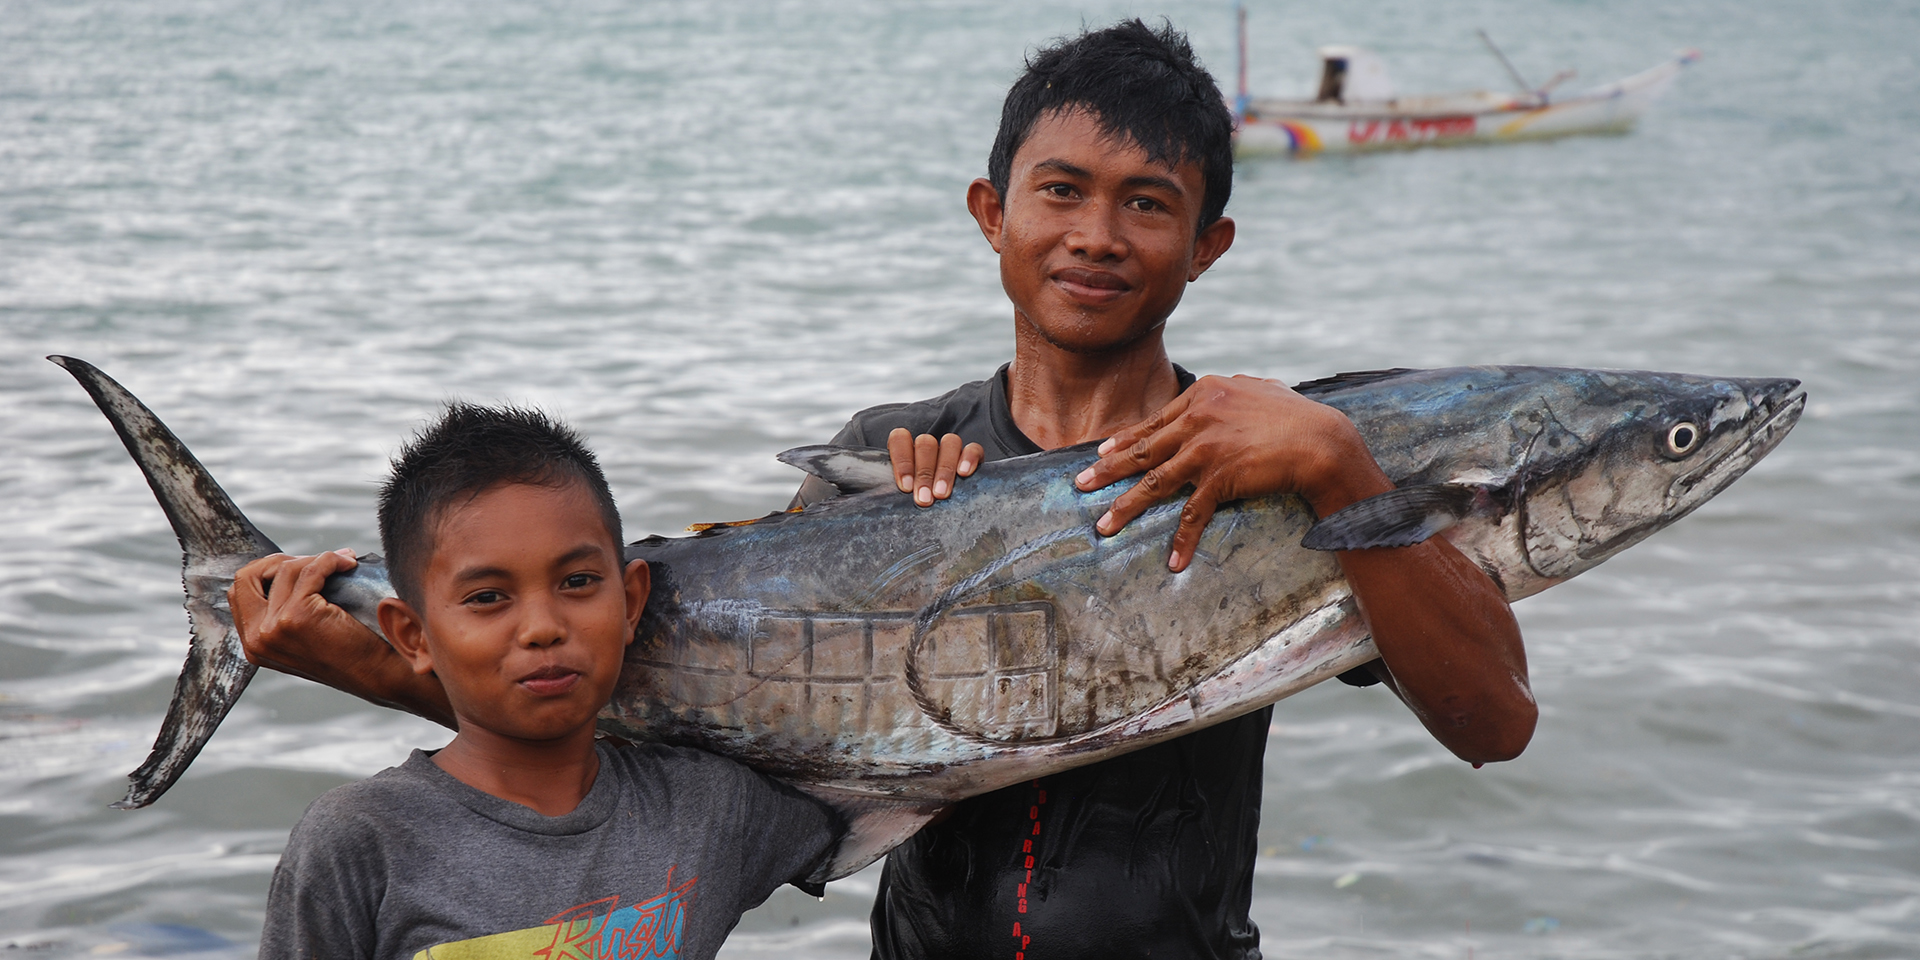 Image of a man and young boy holding up a large fish and smiling.